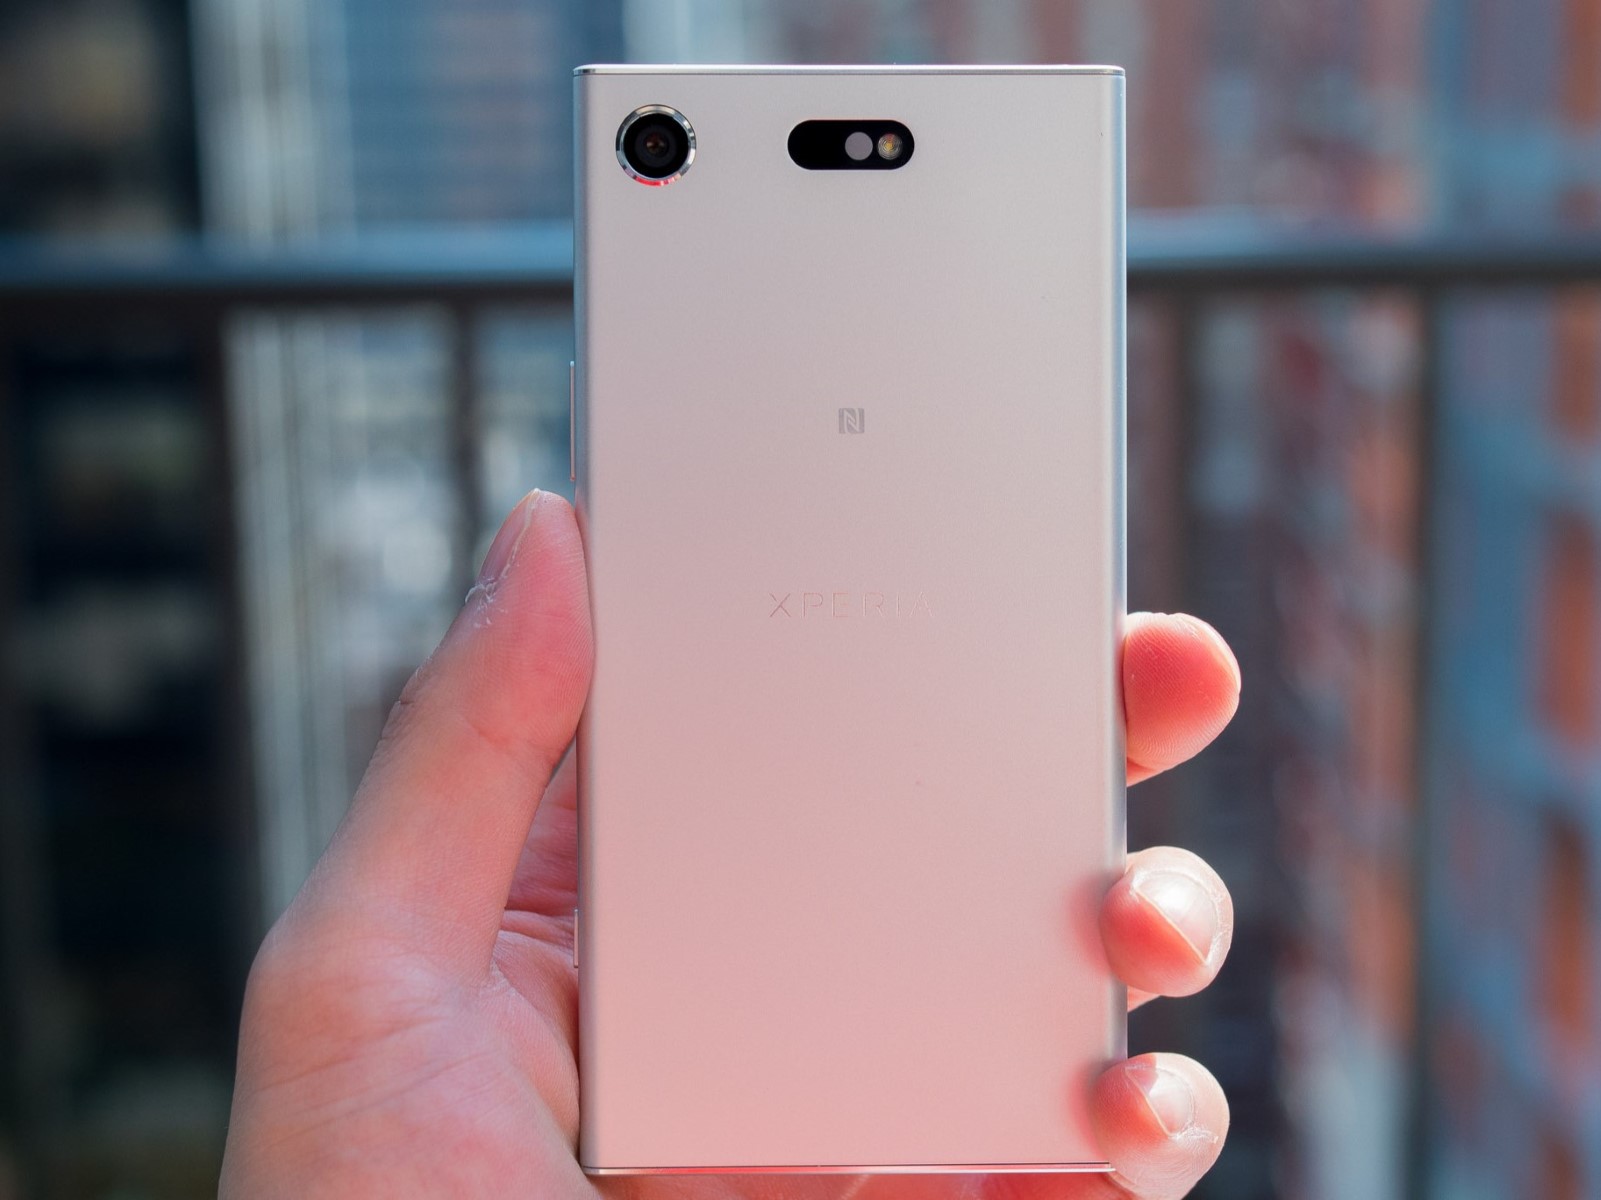 Xperia XZ1 Compact: Activating Dual SIM – Step-by-Step Guide